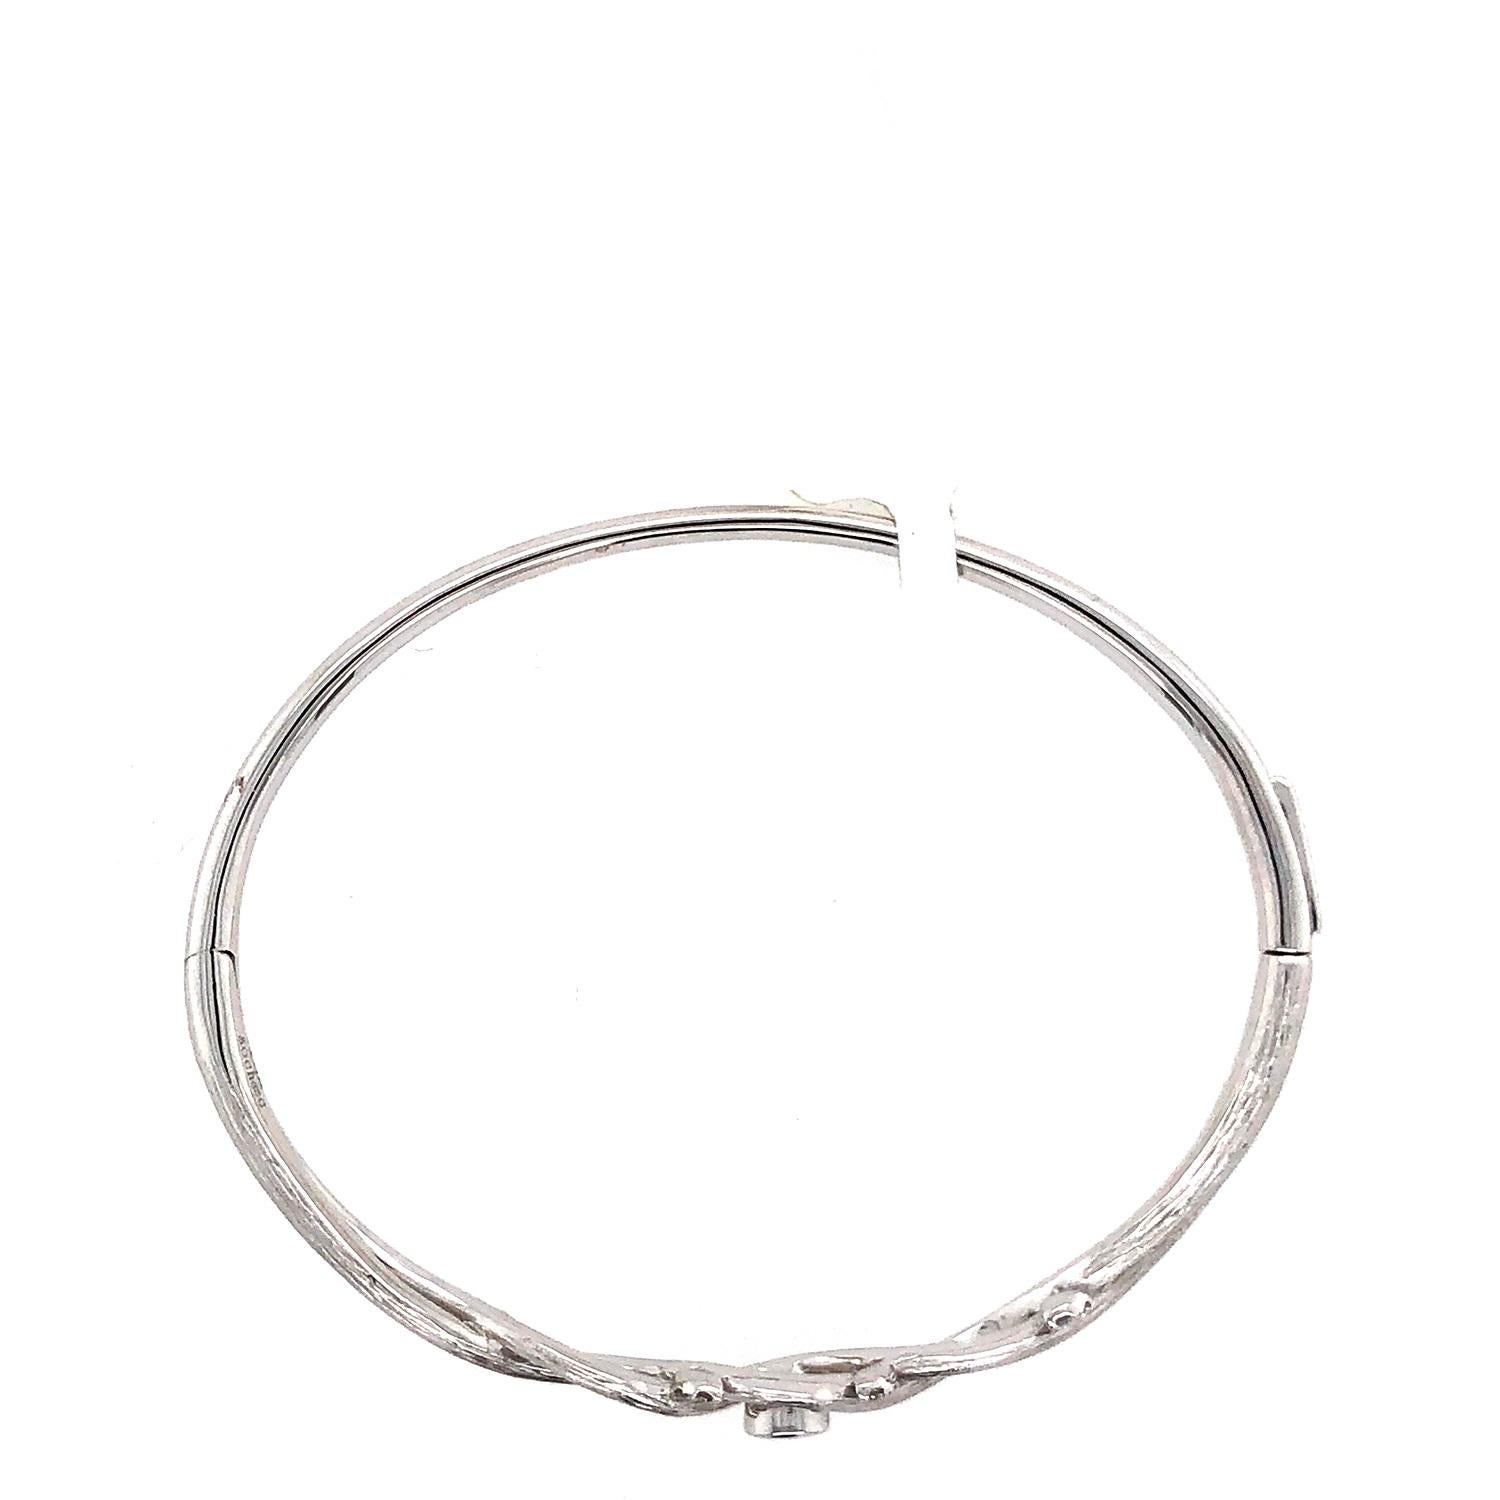 Art Nouveau Twisted Criss Cross Bangle with Round Cut Diamond Made in 18k White Gold For Sale